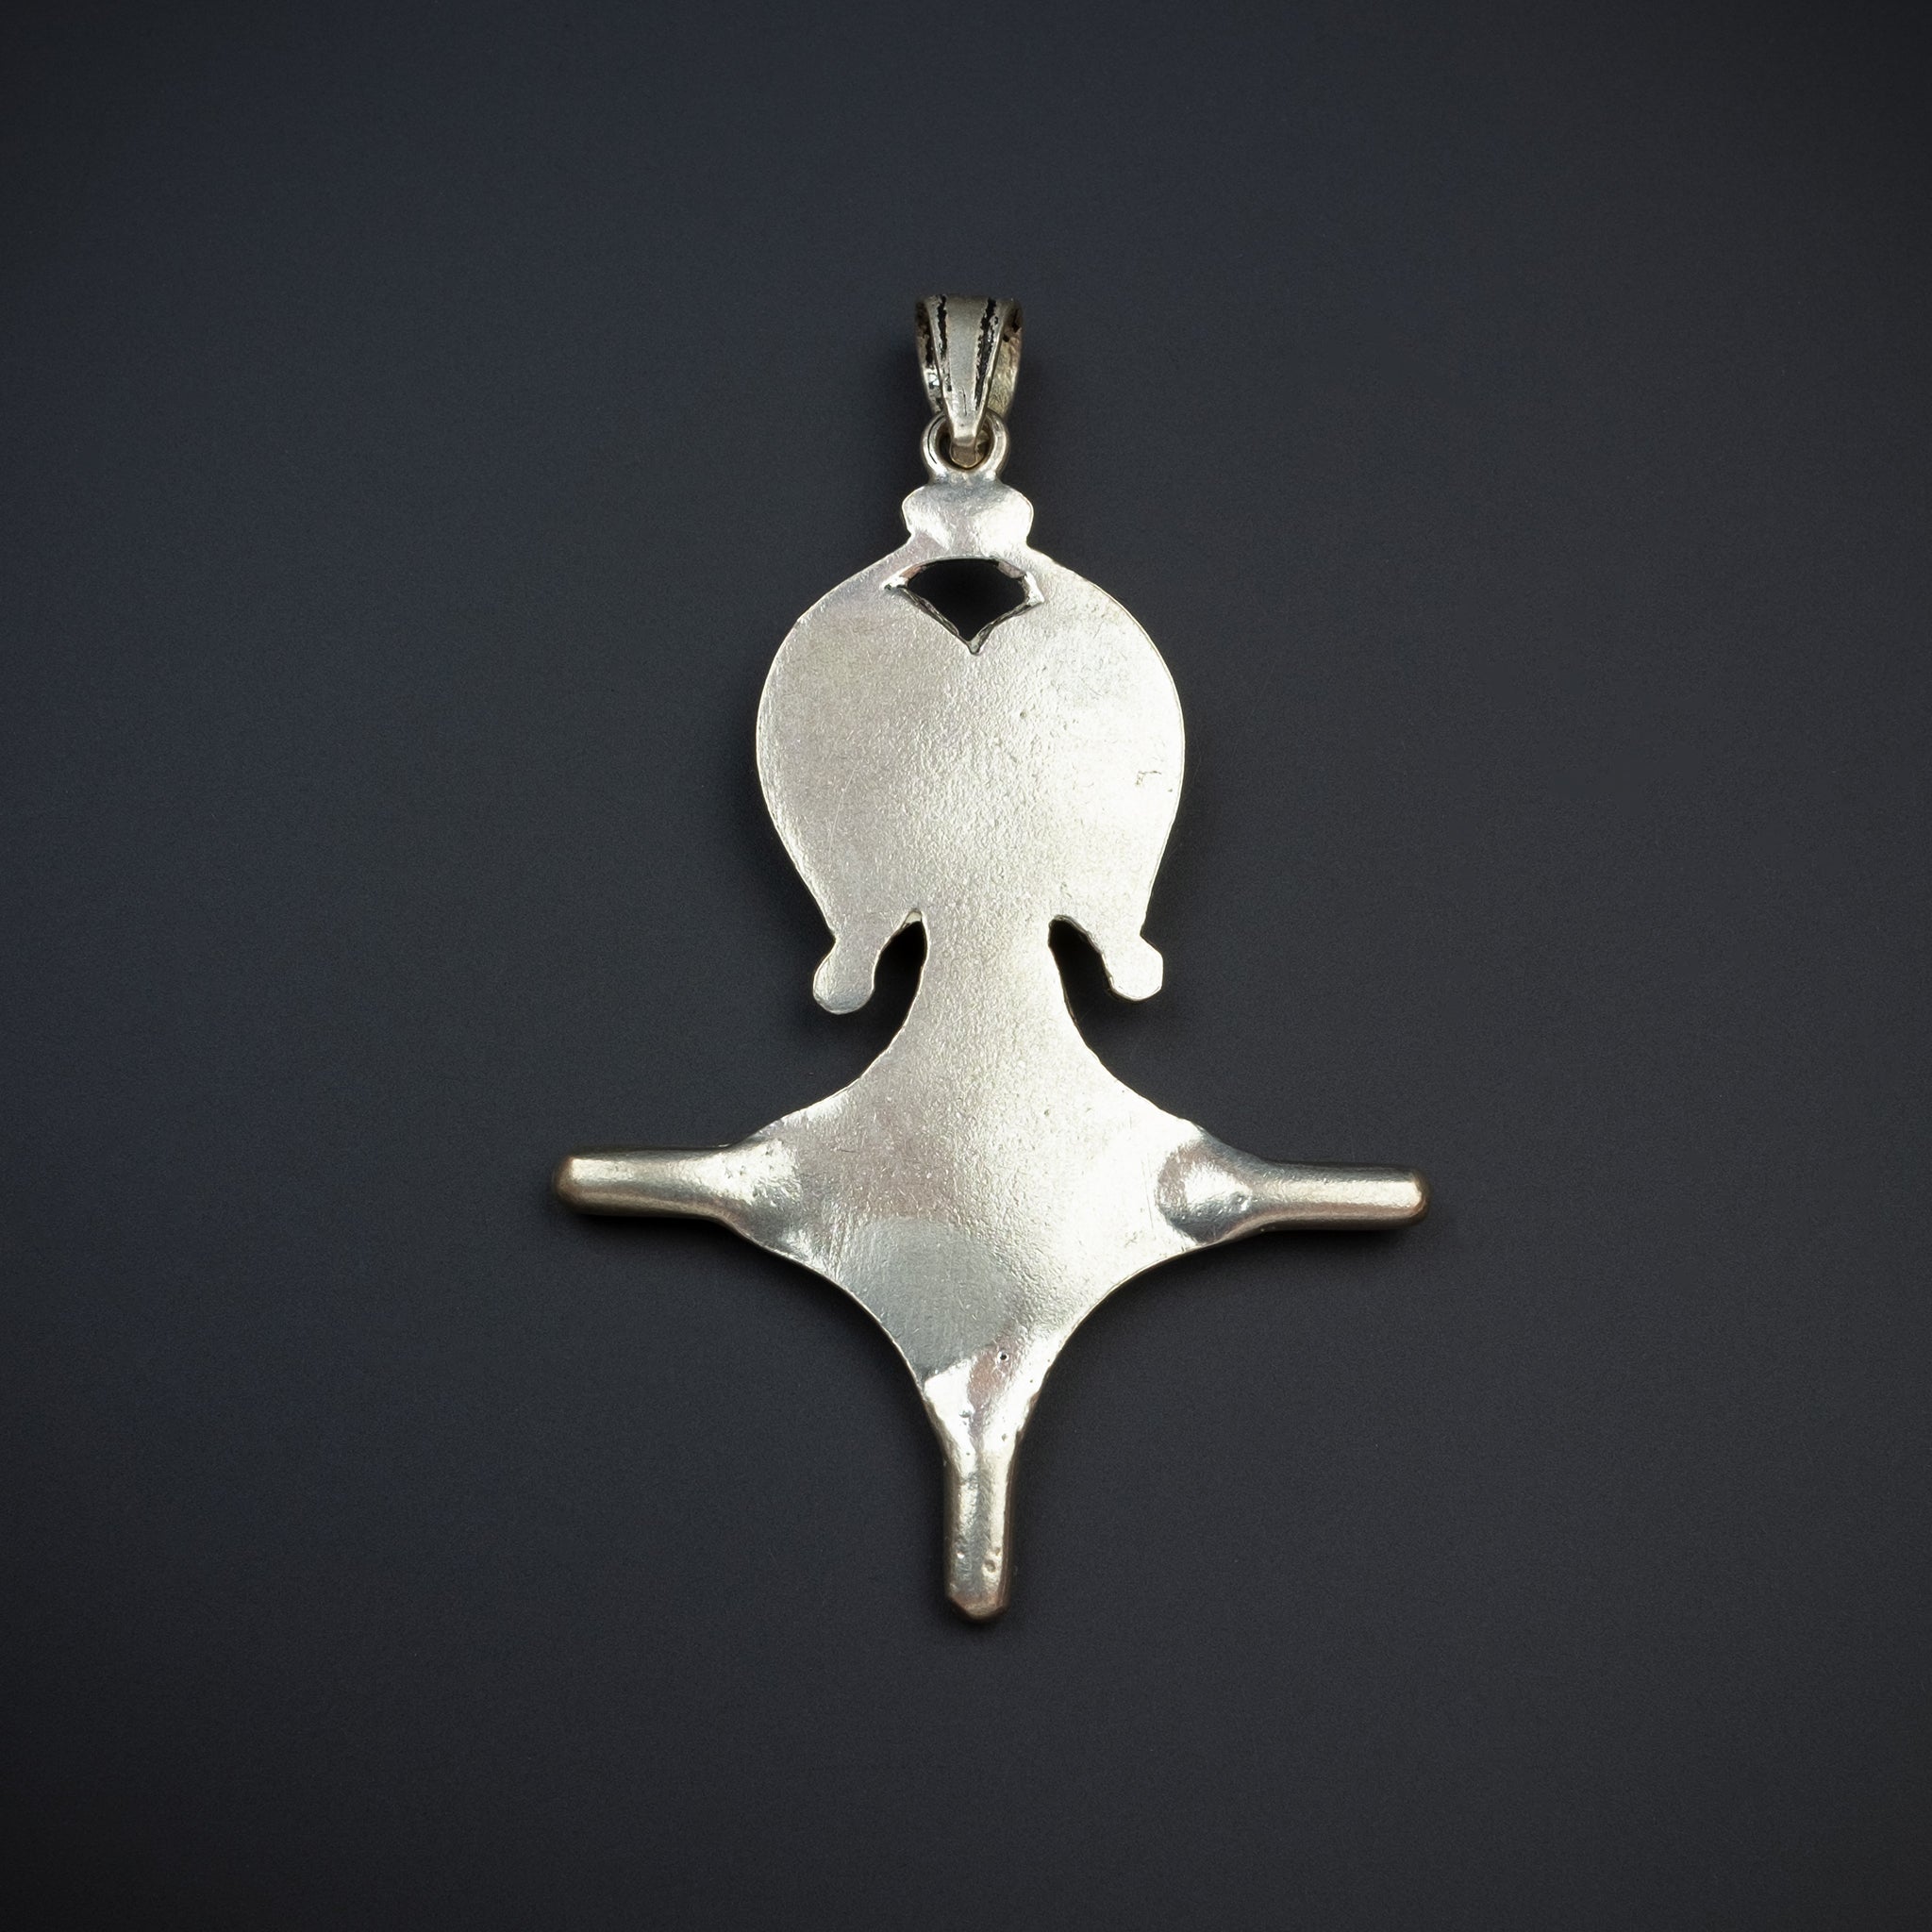 Stylised Silver Southern Cross Pendant from Guelmim, Morocco